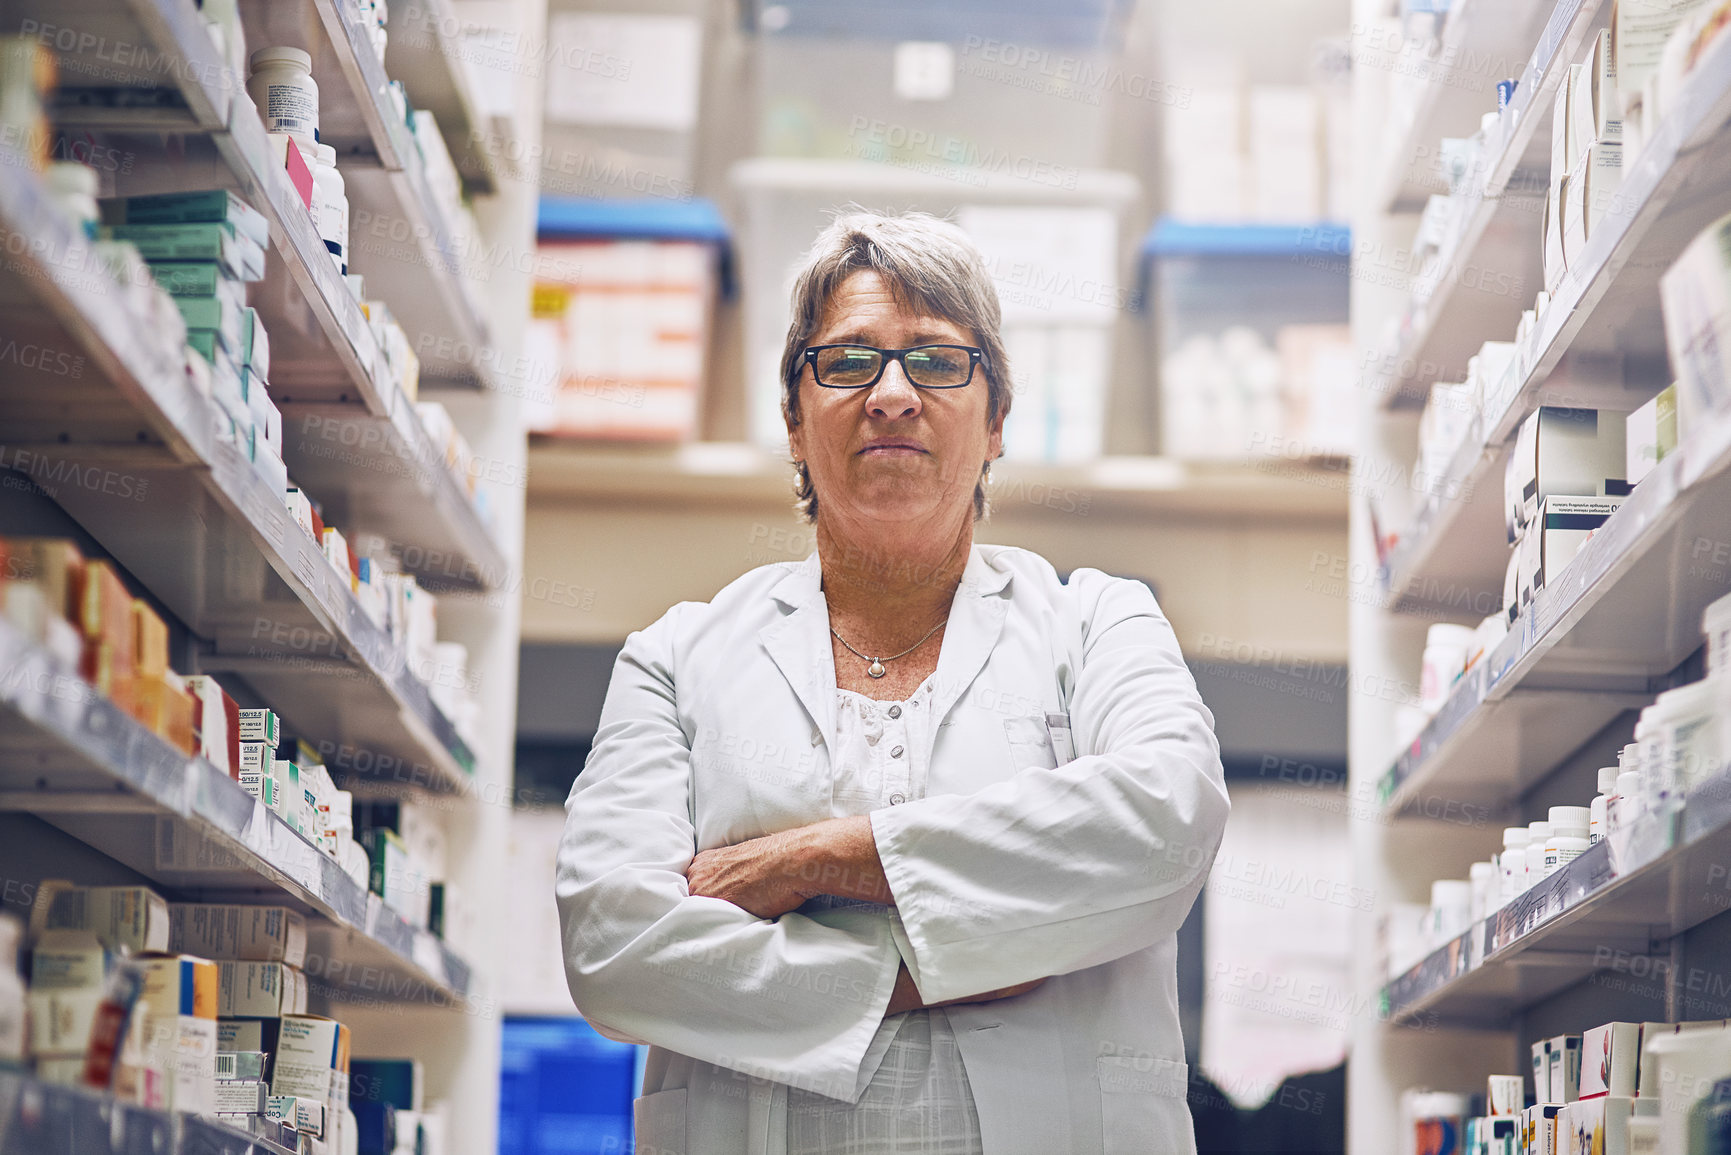 Buy stock photo Shot of a pharmacist at work